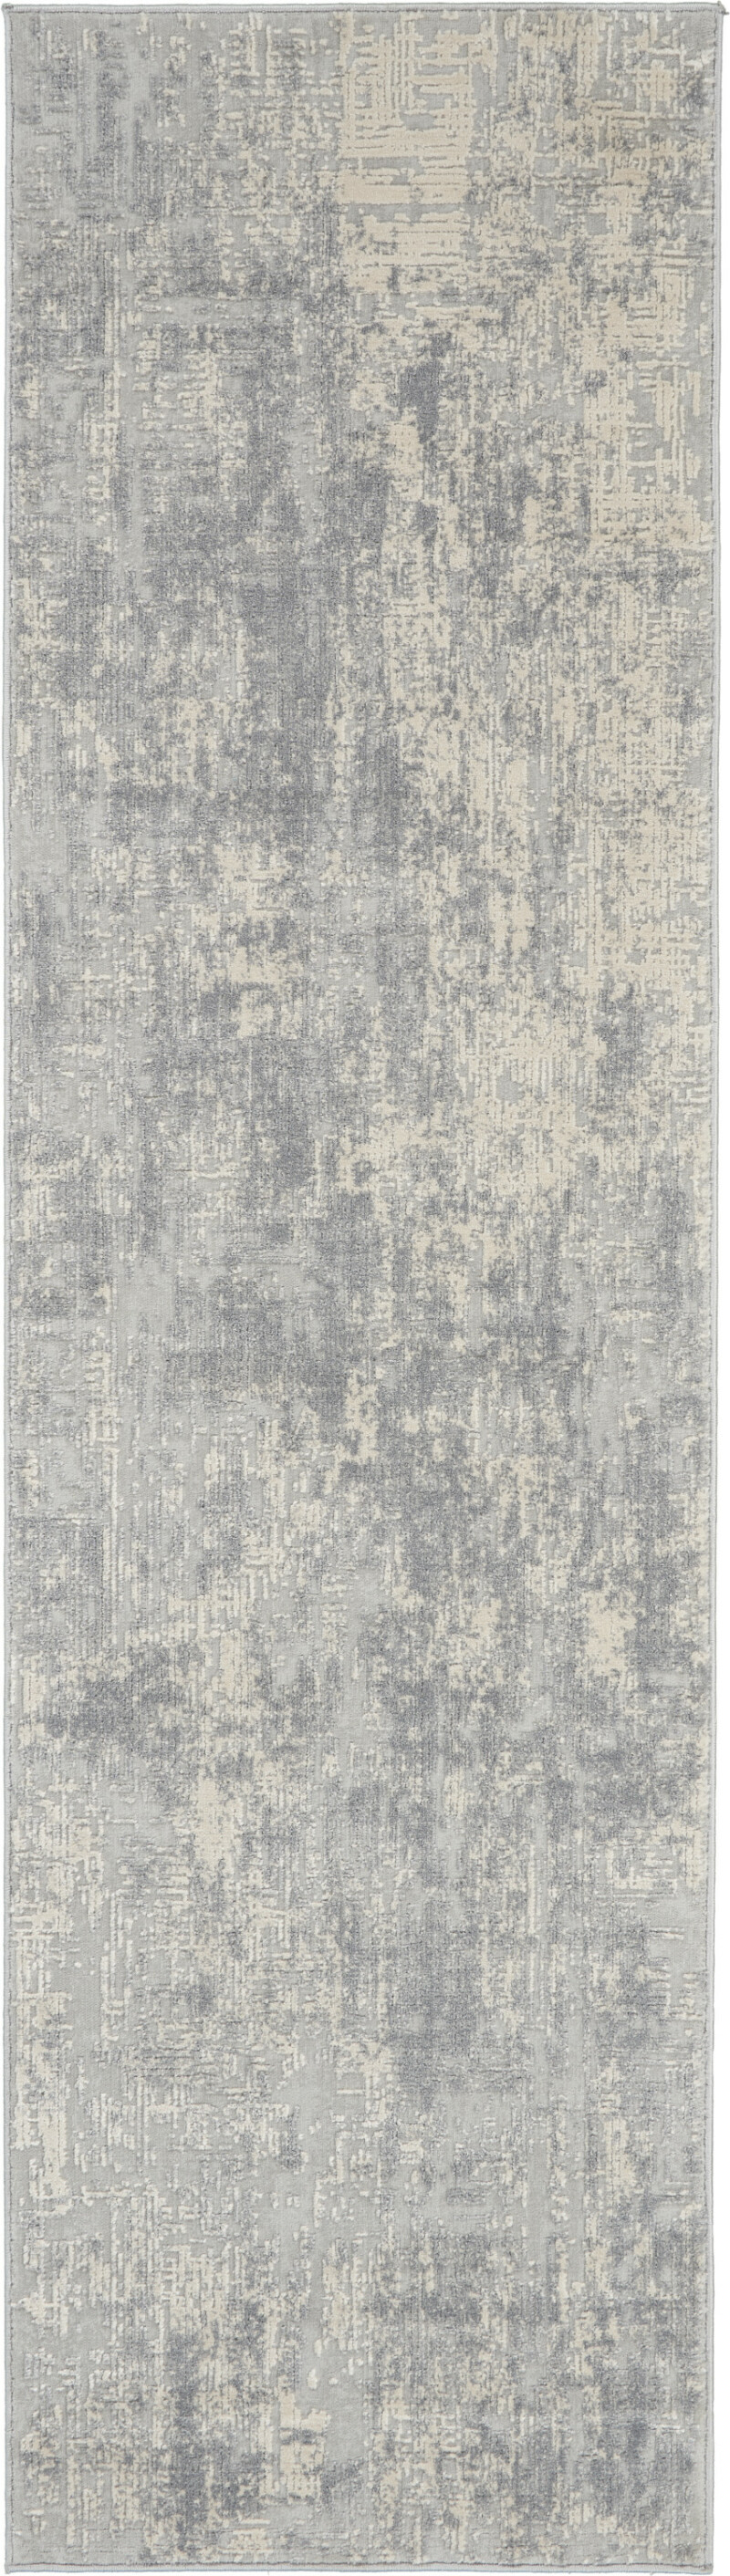 Rus01 Ivory Silver Nourison Rustic Textures Runner Area Rug